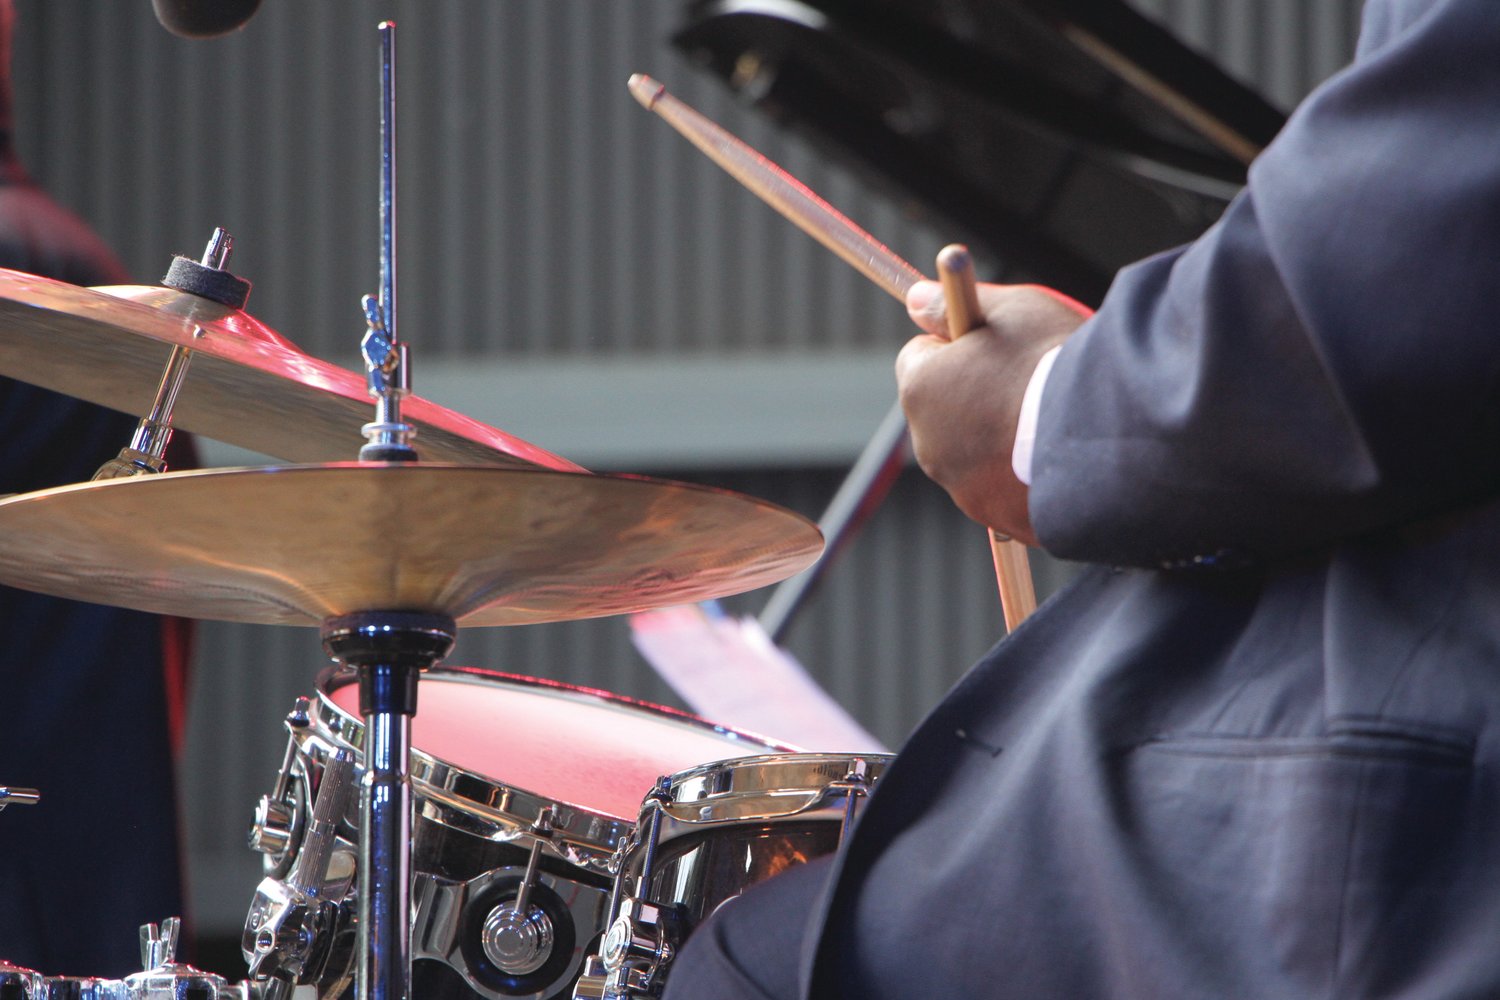 Jazz drummer Carl Allen plays out an opening beat on his set.